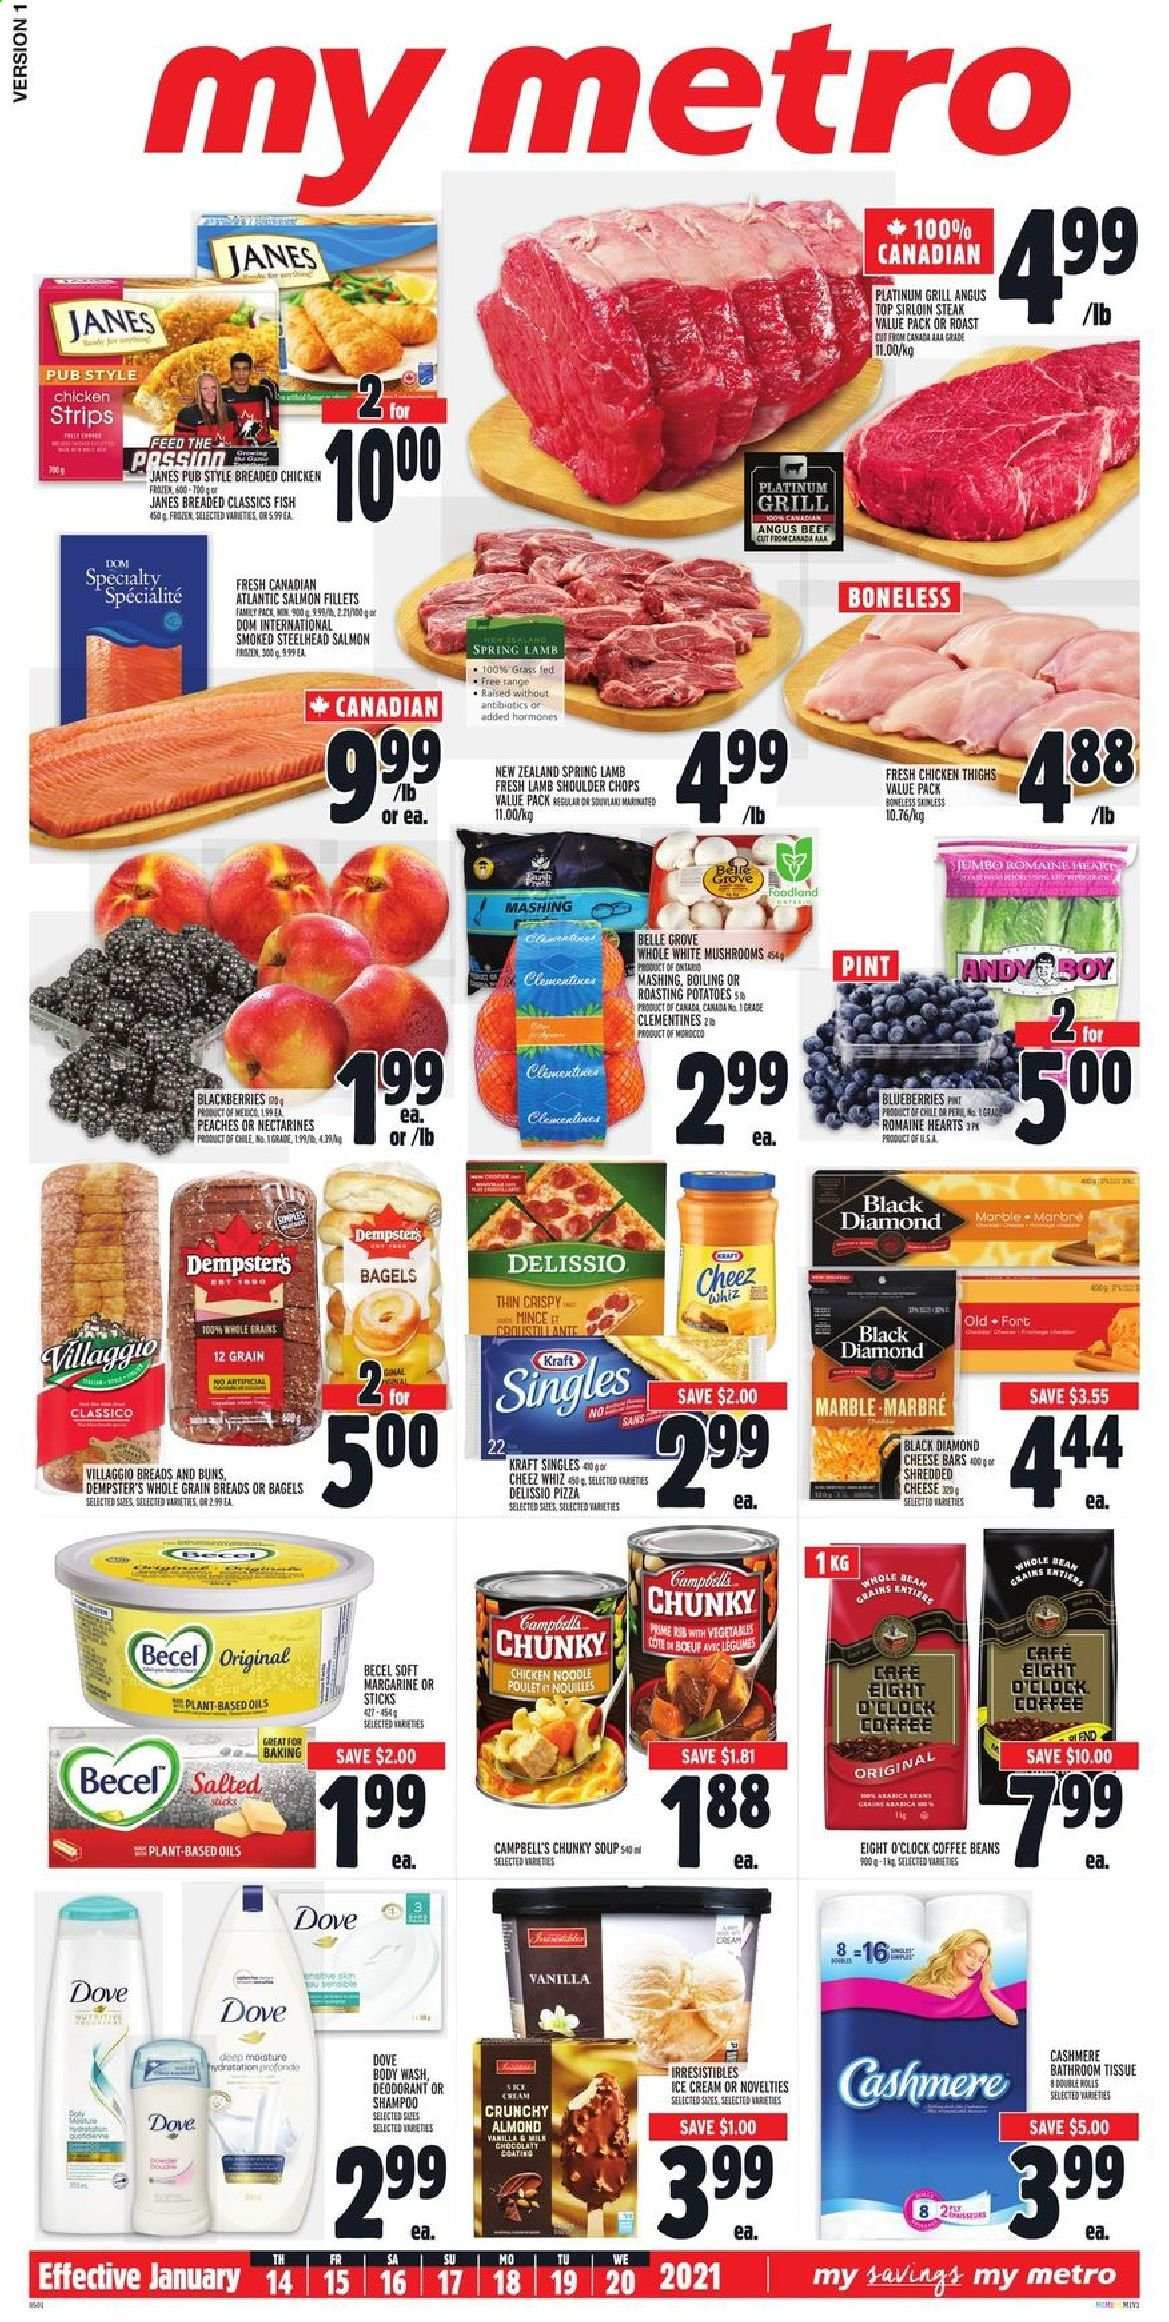 thumbnail - Metro Flyer - January 14, 2021 - January 20, 2021 - Sales products - bagels, buns, potatoes, blackberries, blueberries, clementines, nectarines, peaches, salmon, salmon fillet, fish, Campbell's, pizza, soup, fried chicken, noodles, Kraft®, sandwich slices, shredded cheese, Kraft Singles, milk, margarine, ice cream, strips, chicken strips, Classico, coffee beans, Eight O'Clock, chicken thighs, chicken, beef meat, beef sirloin, sirloin steak, lamb meat, lamb shoulder, bath tissue, body wash, anti-perspirant, shampoo, steak, deodorant. Page 1.